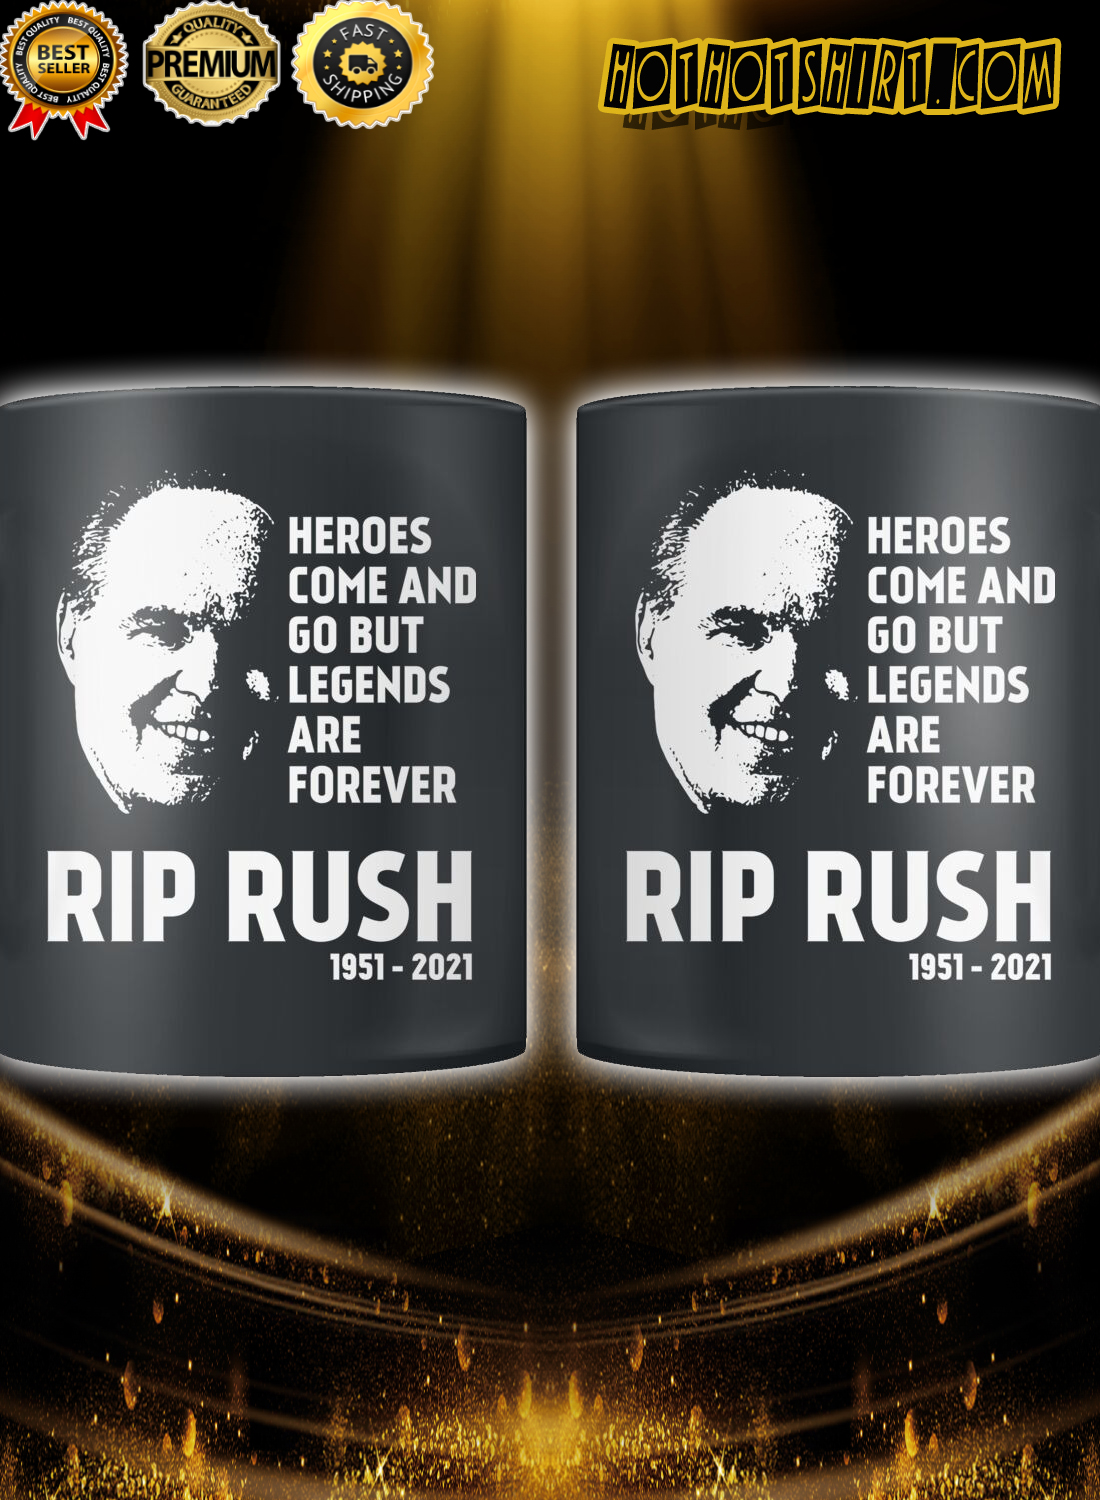 Rip rush heroes come and go but legends are forever mug